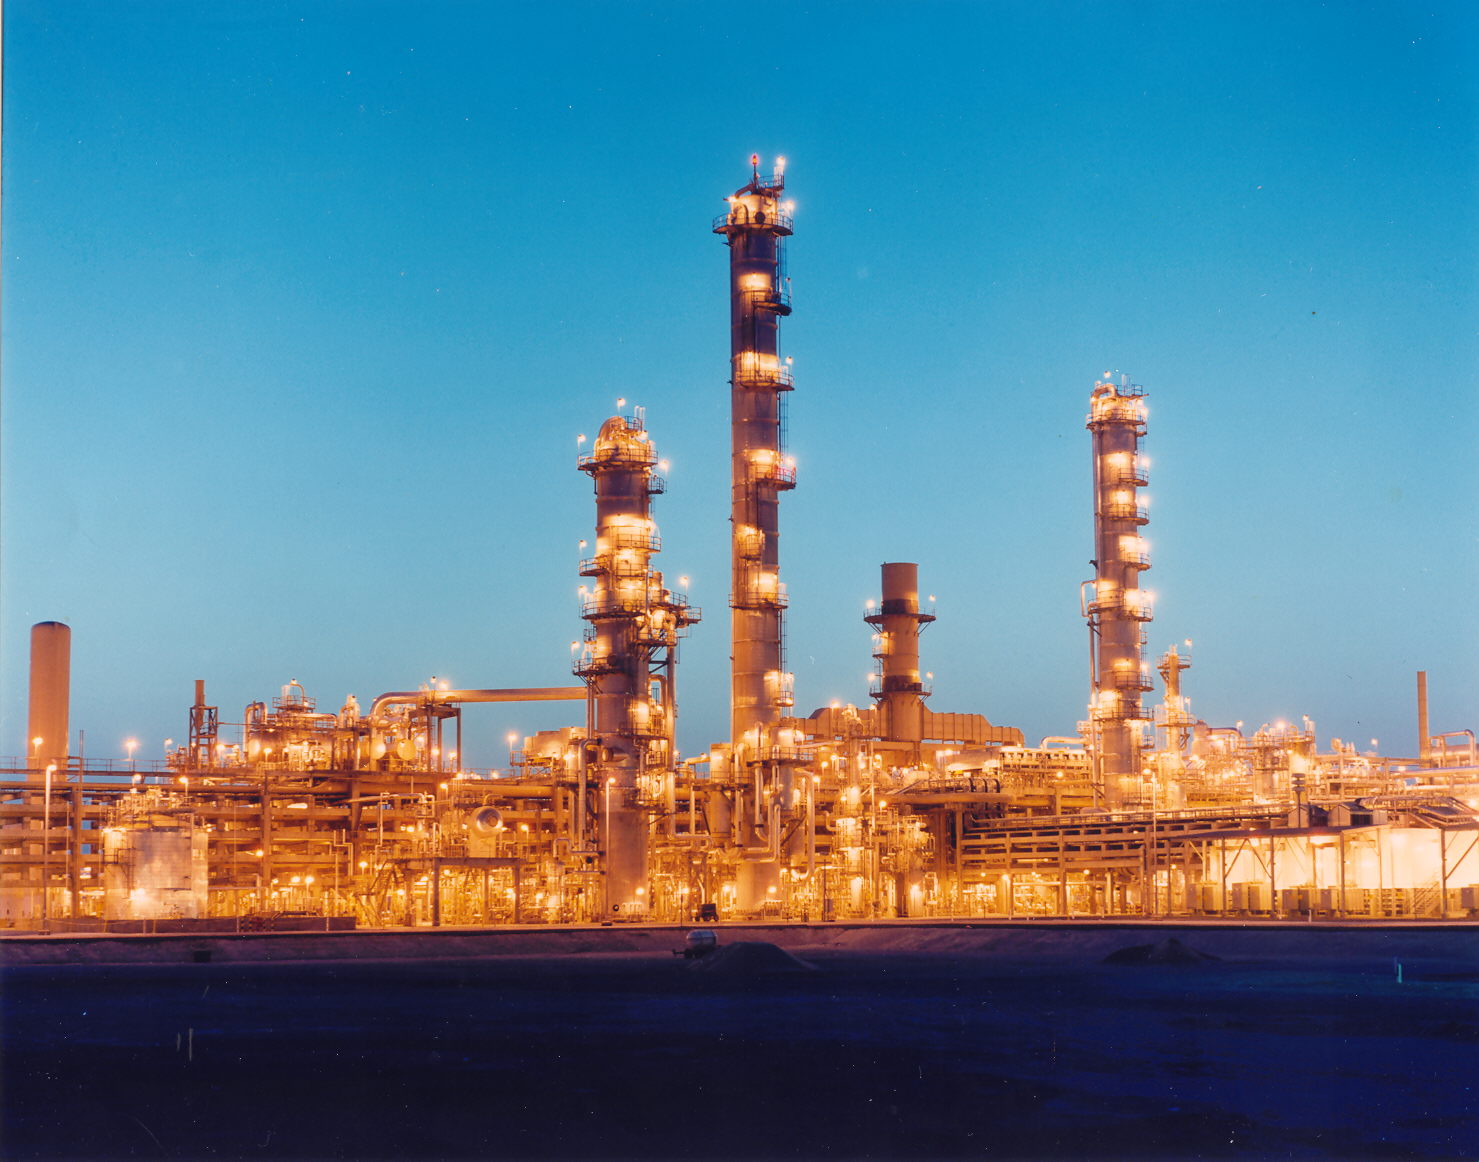  Saudi Polymers Company Manufacturing Facility Begins Commercial Production, Chevron Phillips Chemical Announces